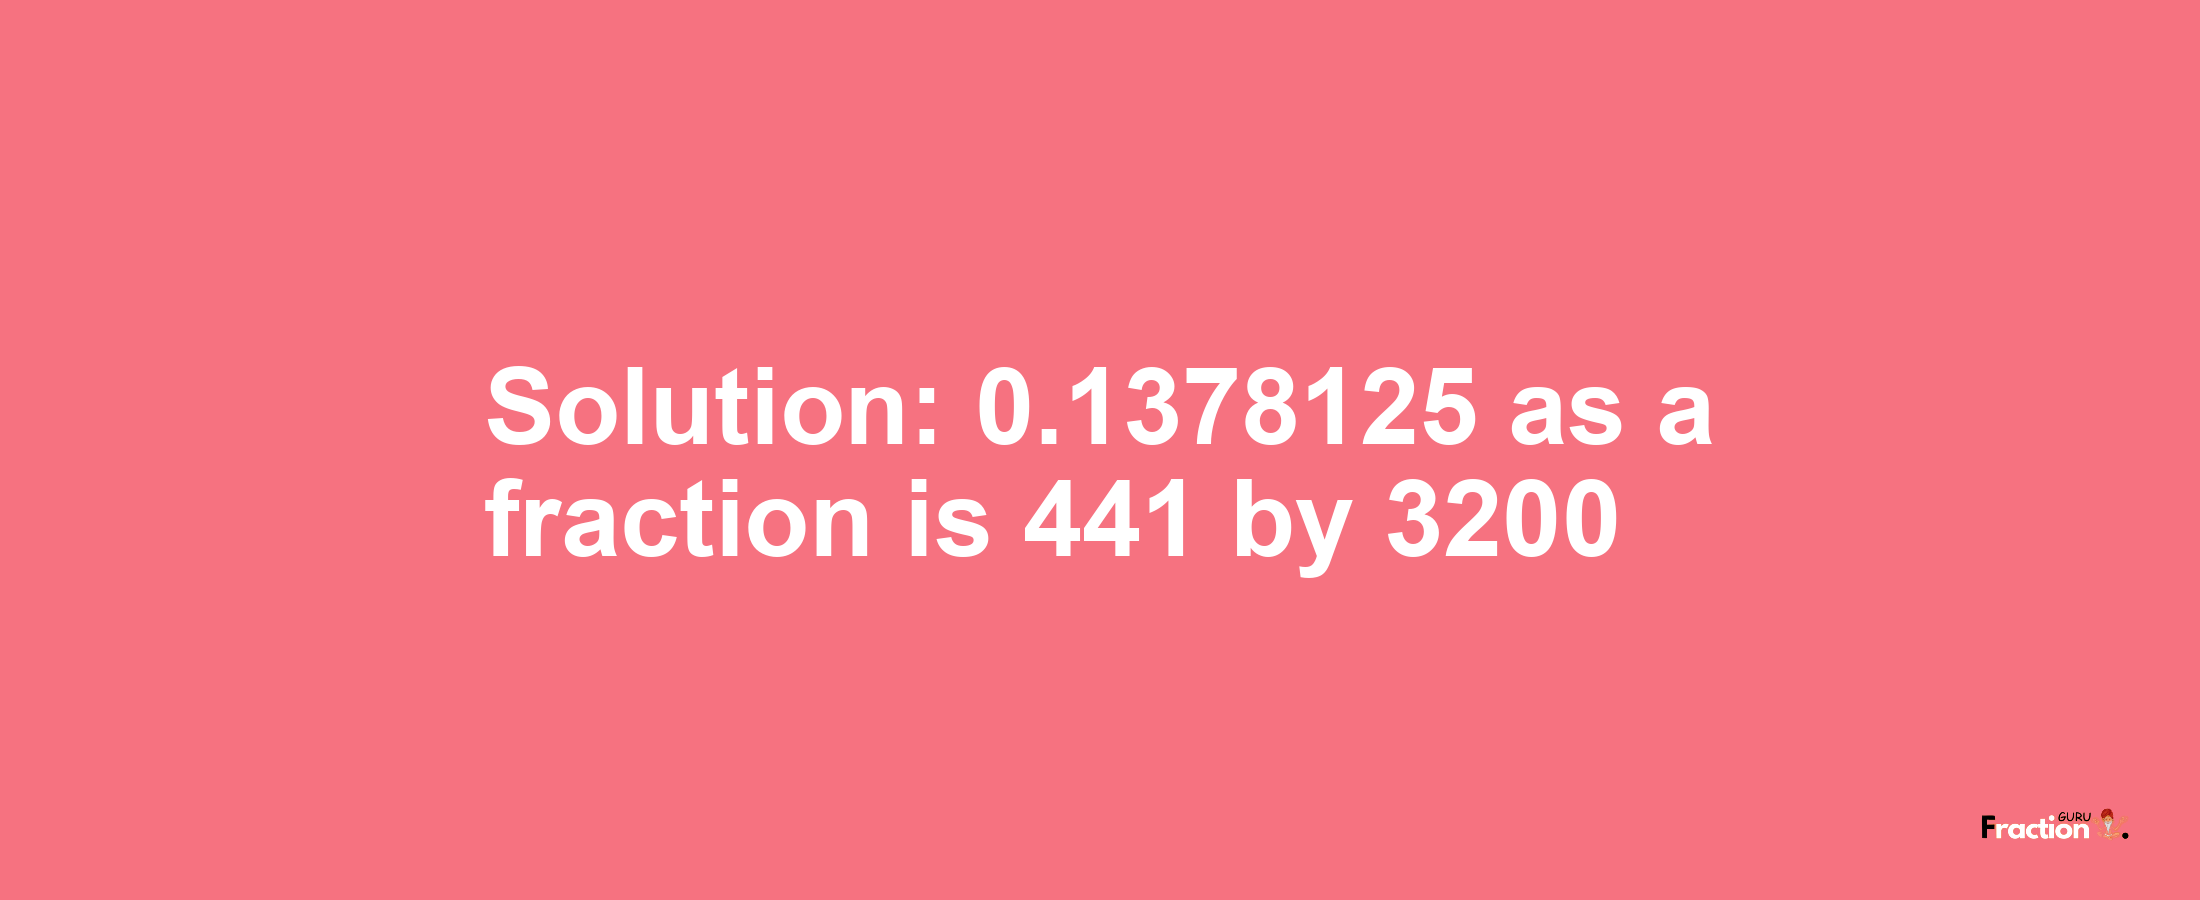 Solution:0.1378125 as a fraction is 441/3200